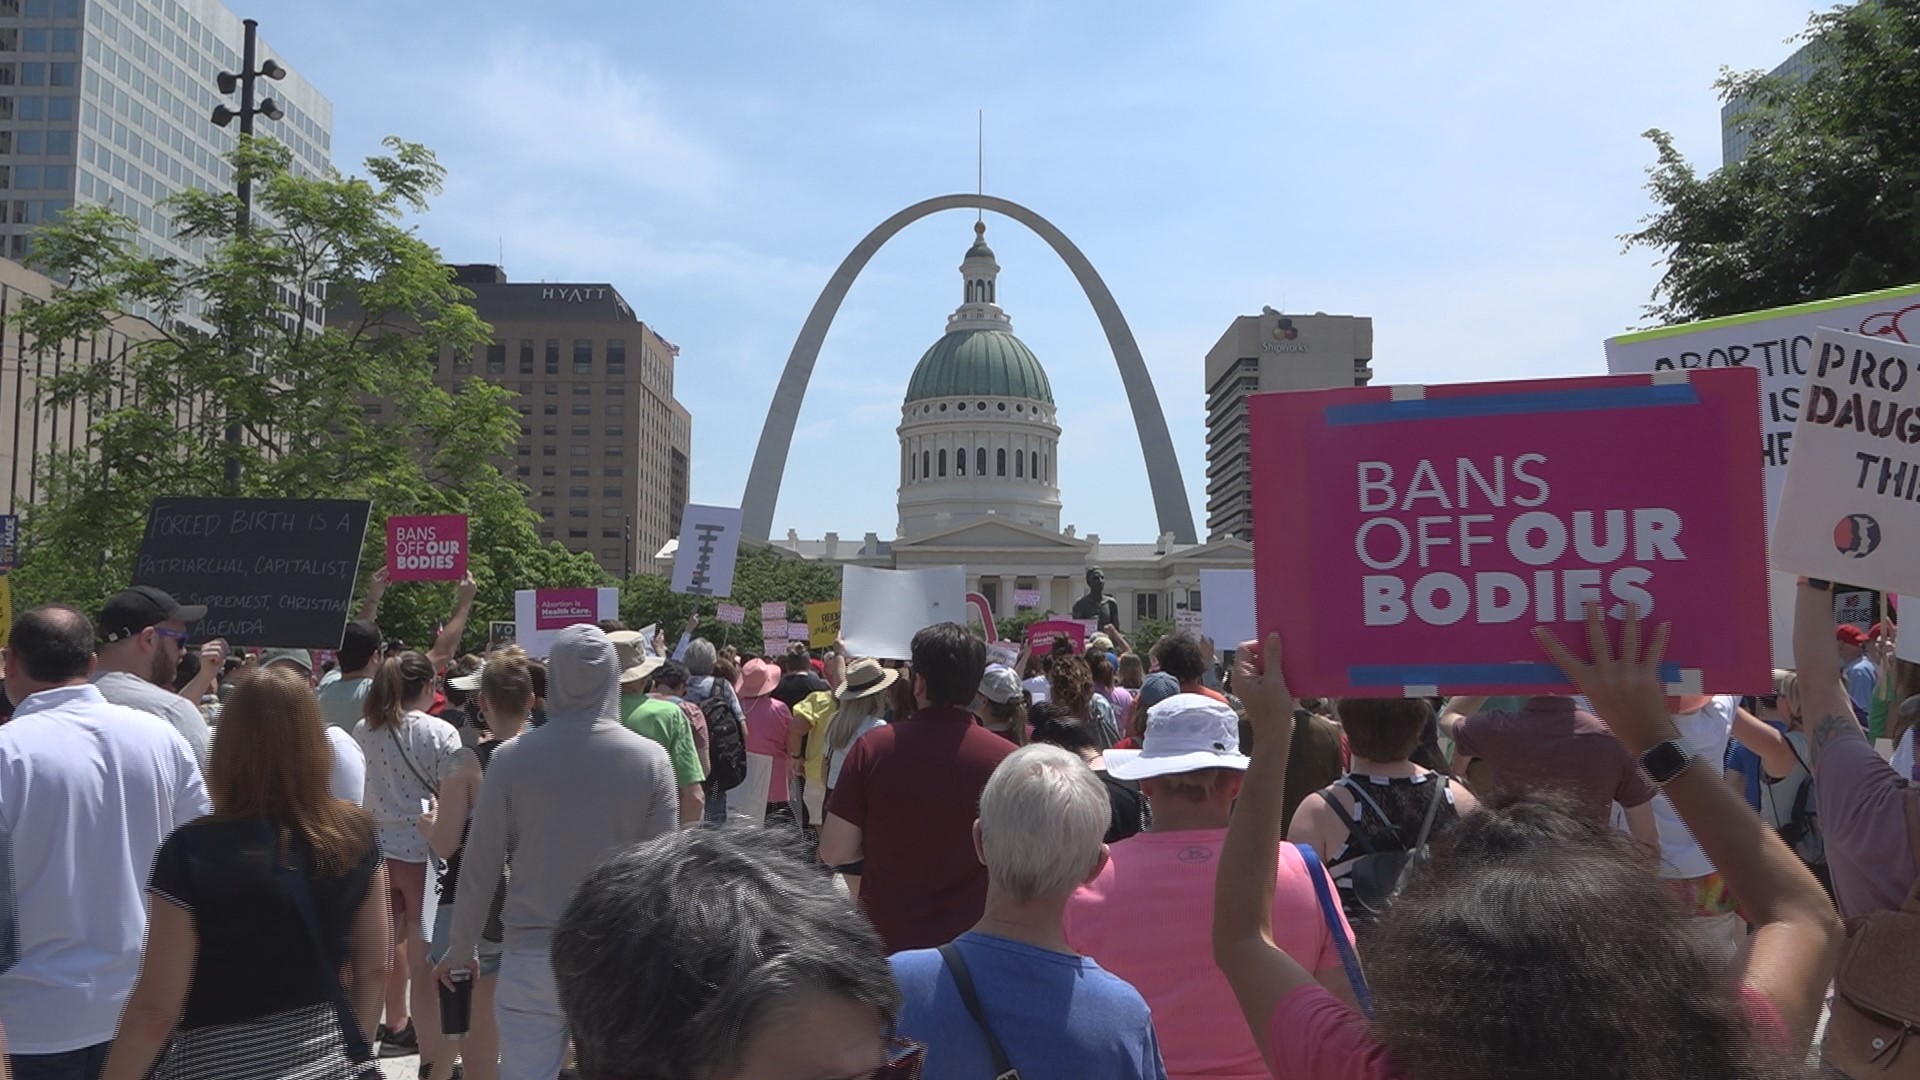 Missouri is one of 22 states that have laws that would restrict abortions if Roe v. Wade is overturned by the U.S. Supreme Court.